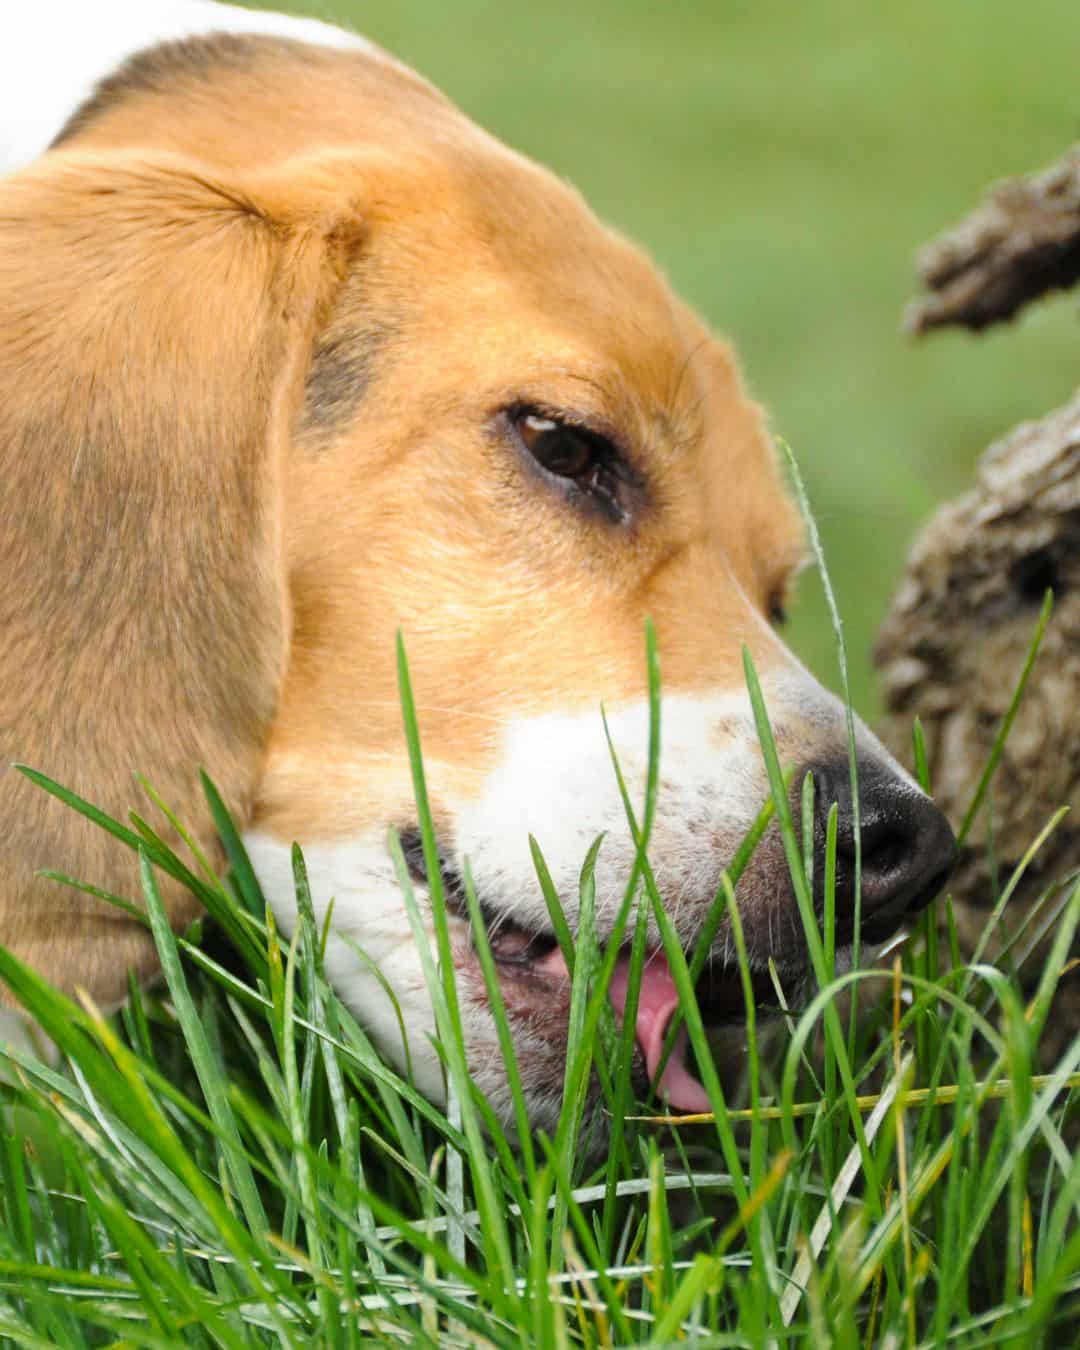 Why Do Dogs Eat Grass? The Truth Behind the Myth